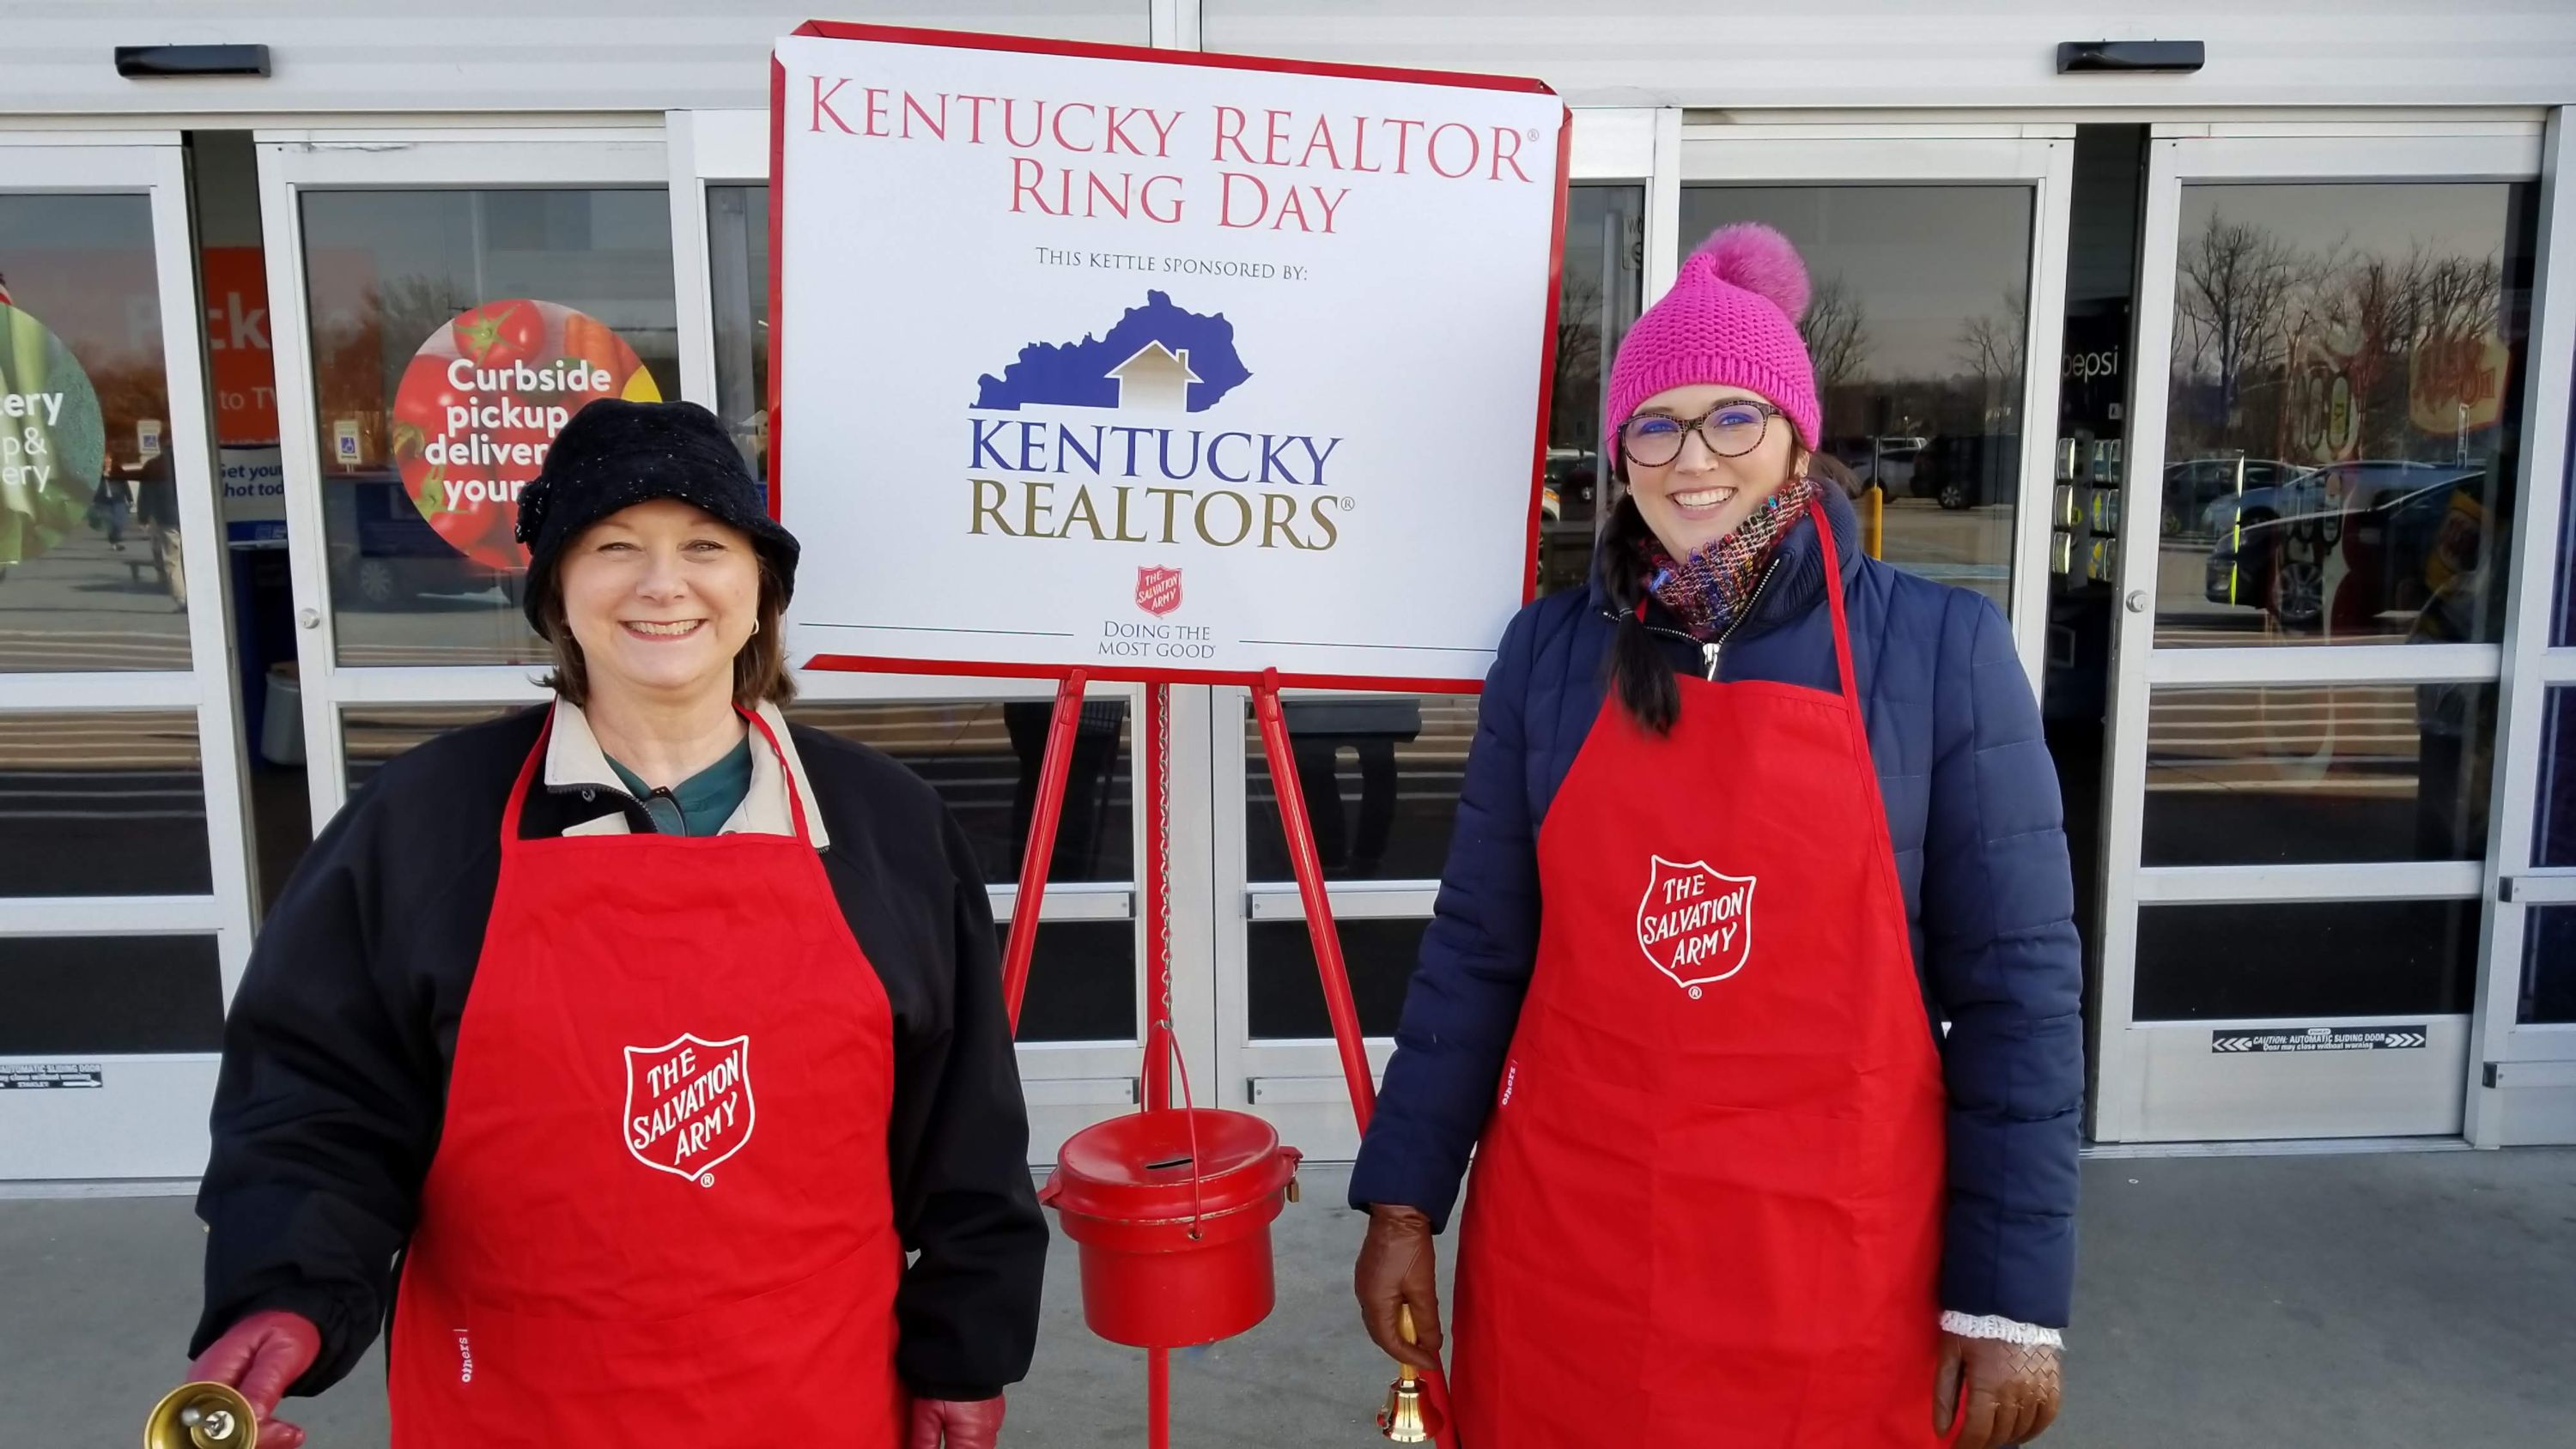 Kentucky REALTOR® Ring Day Raises over $13,000 for Salvation Army